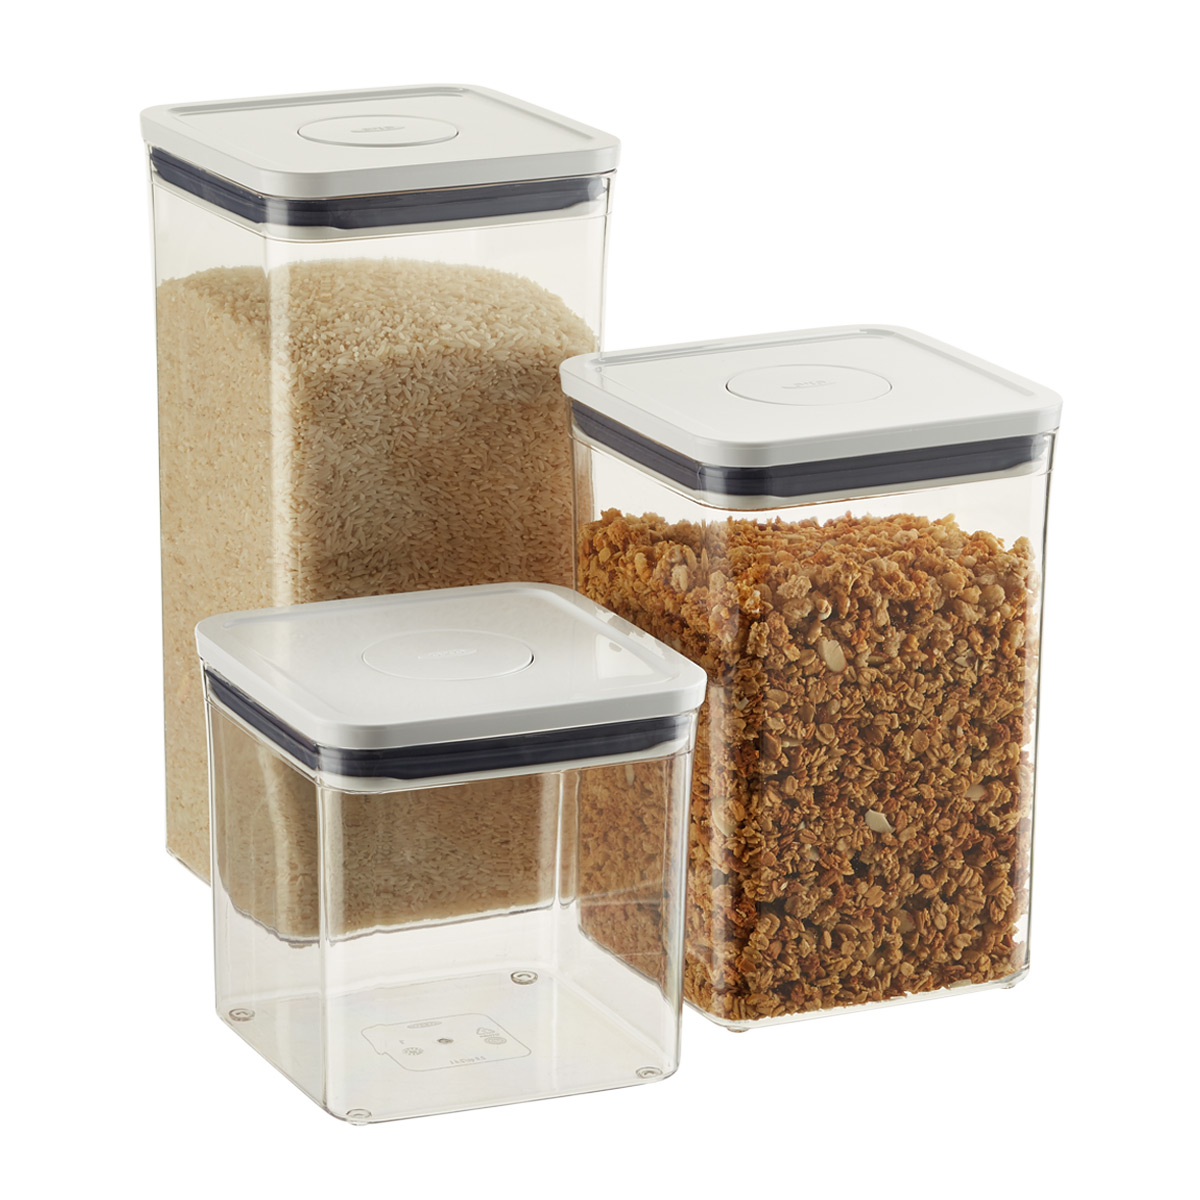 Loaded Let at forstå appetit OXO Good Grips POP Square Canisters | The Container Store